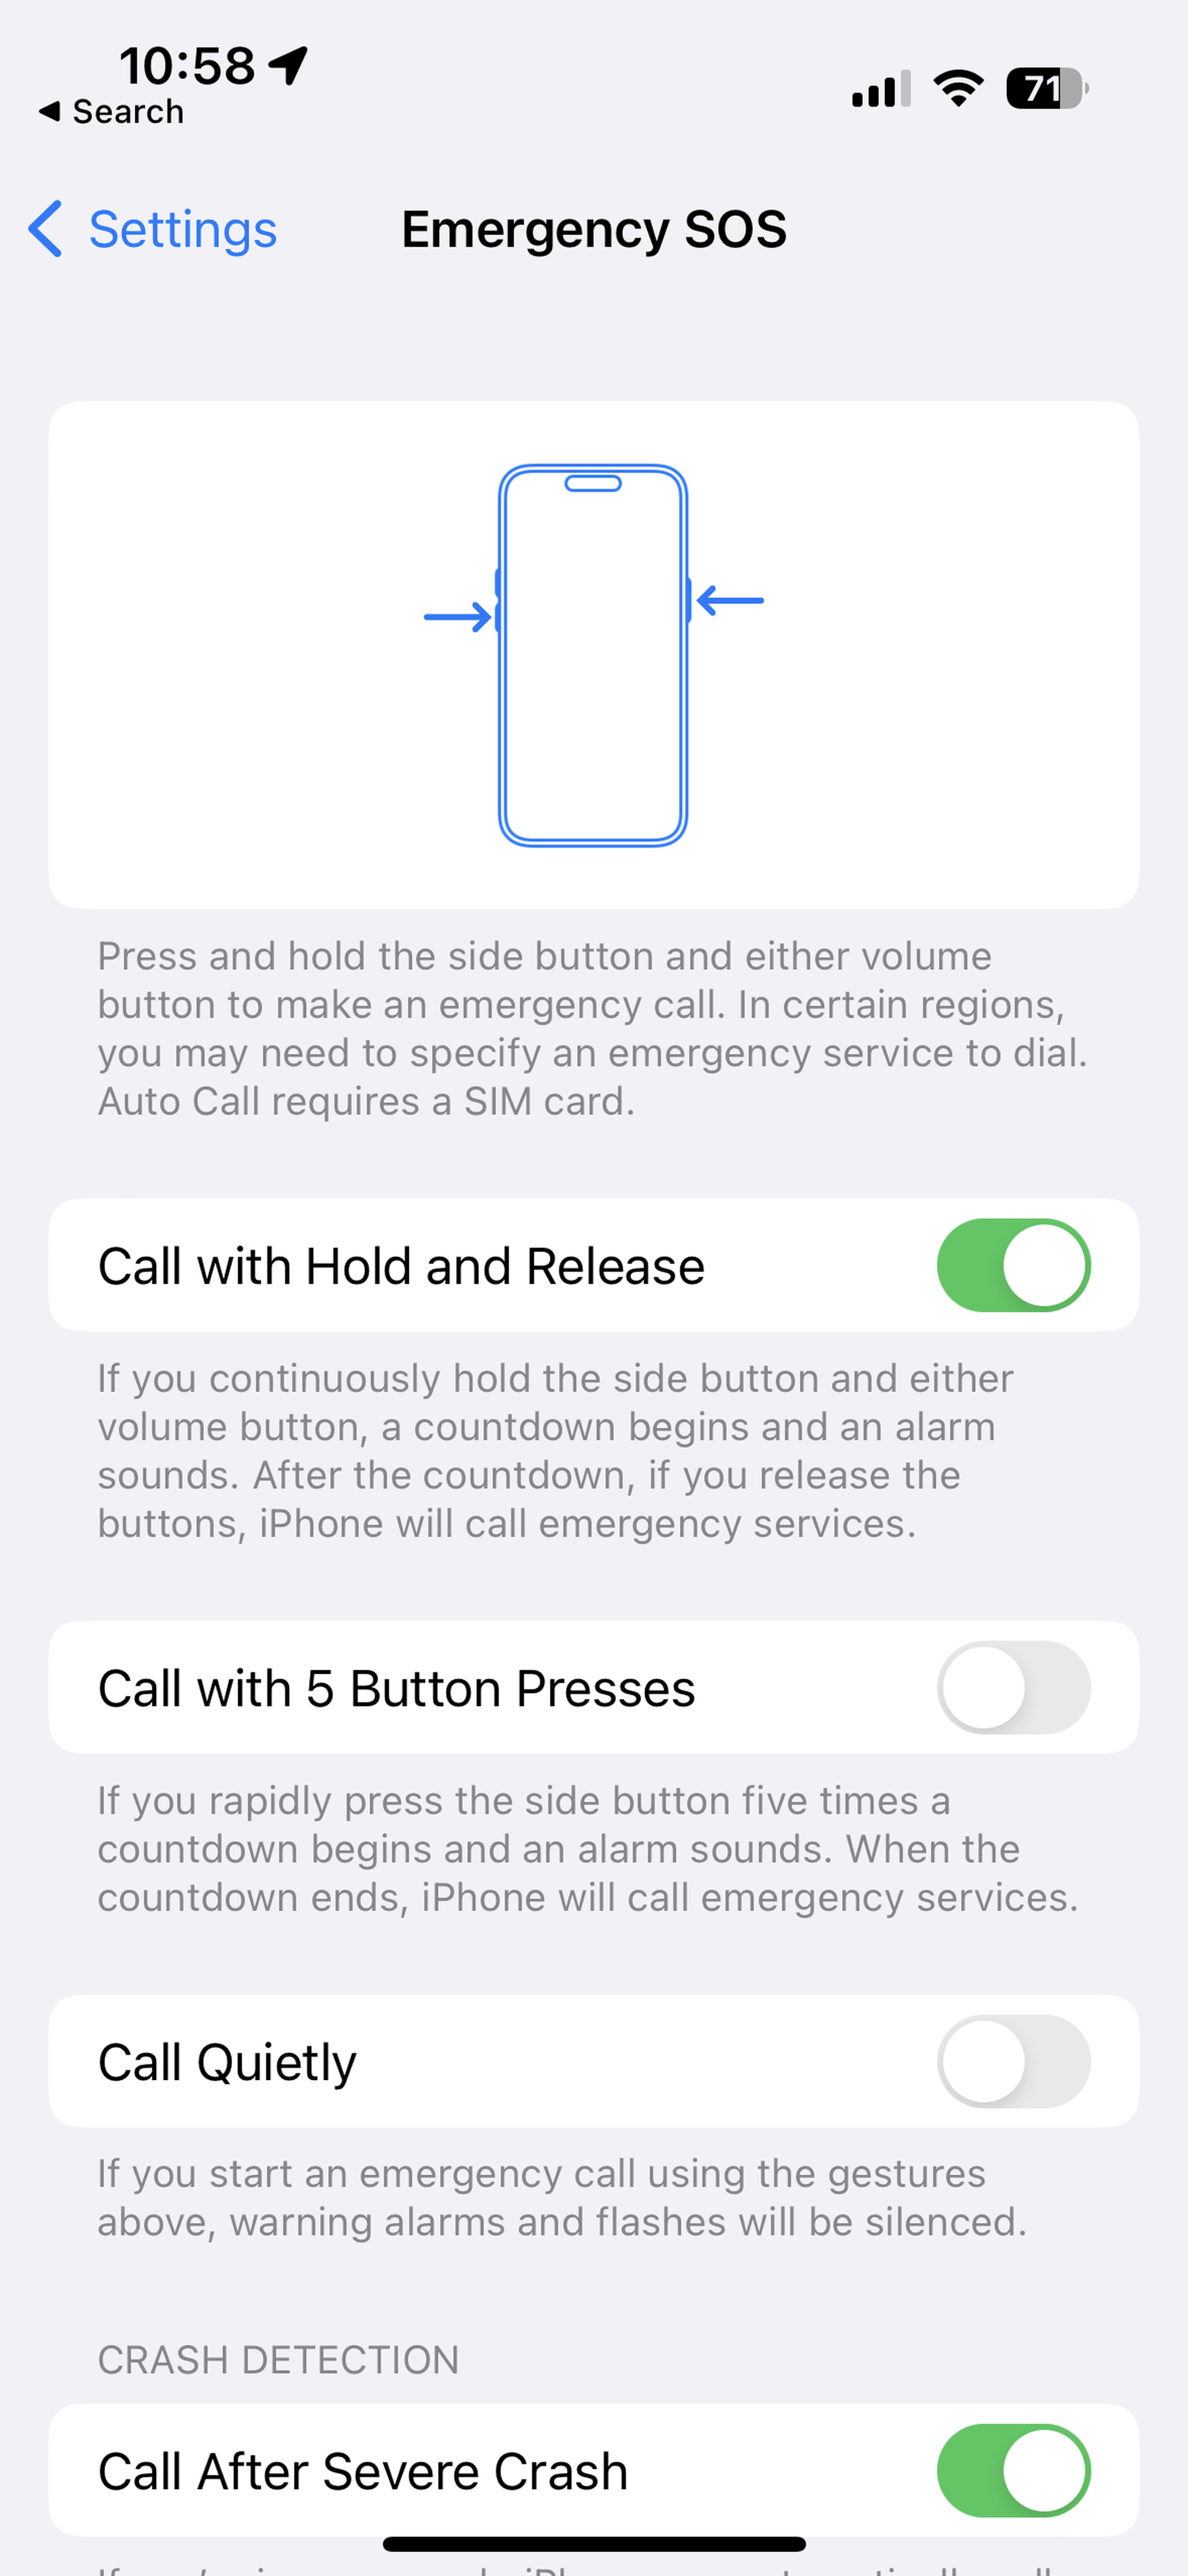 iPhone’s Emergency SOS page with toggles for Call with Hold, Call with 5 Presses, Call Quietly, and Call After Severe Crash.